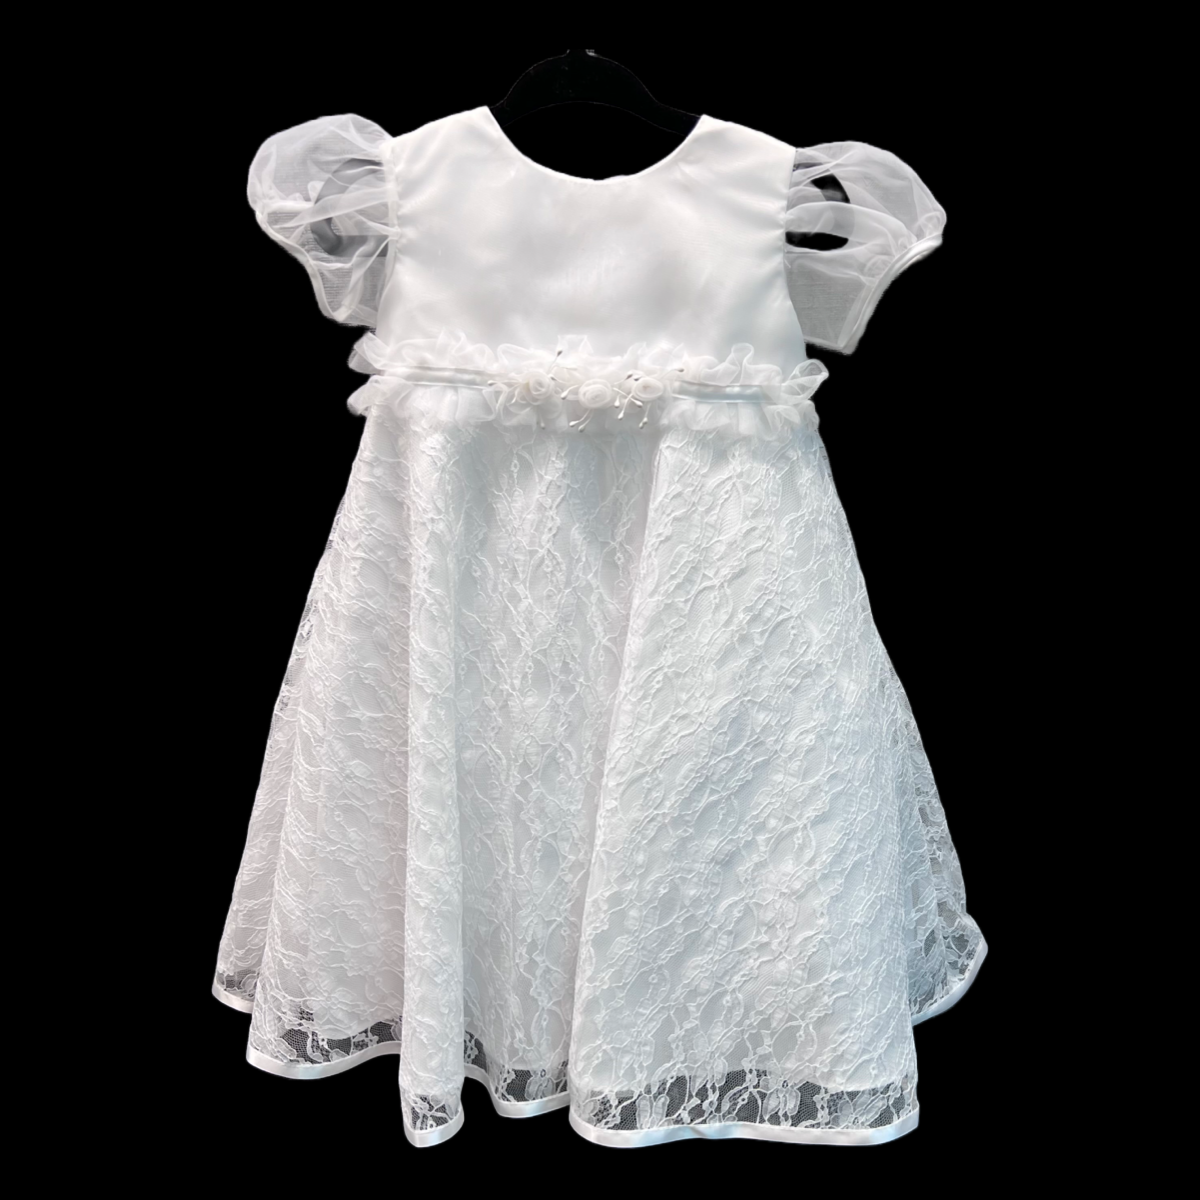 White Baptism Gown w/ Lace Overlay